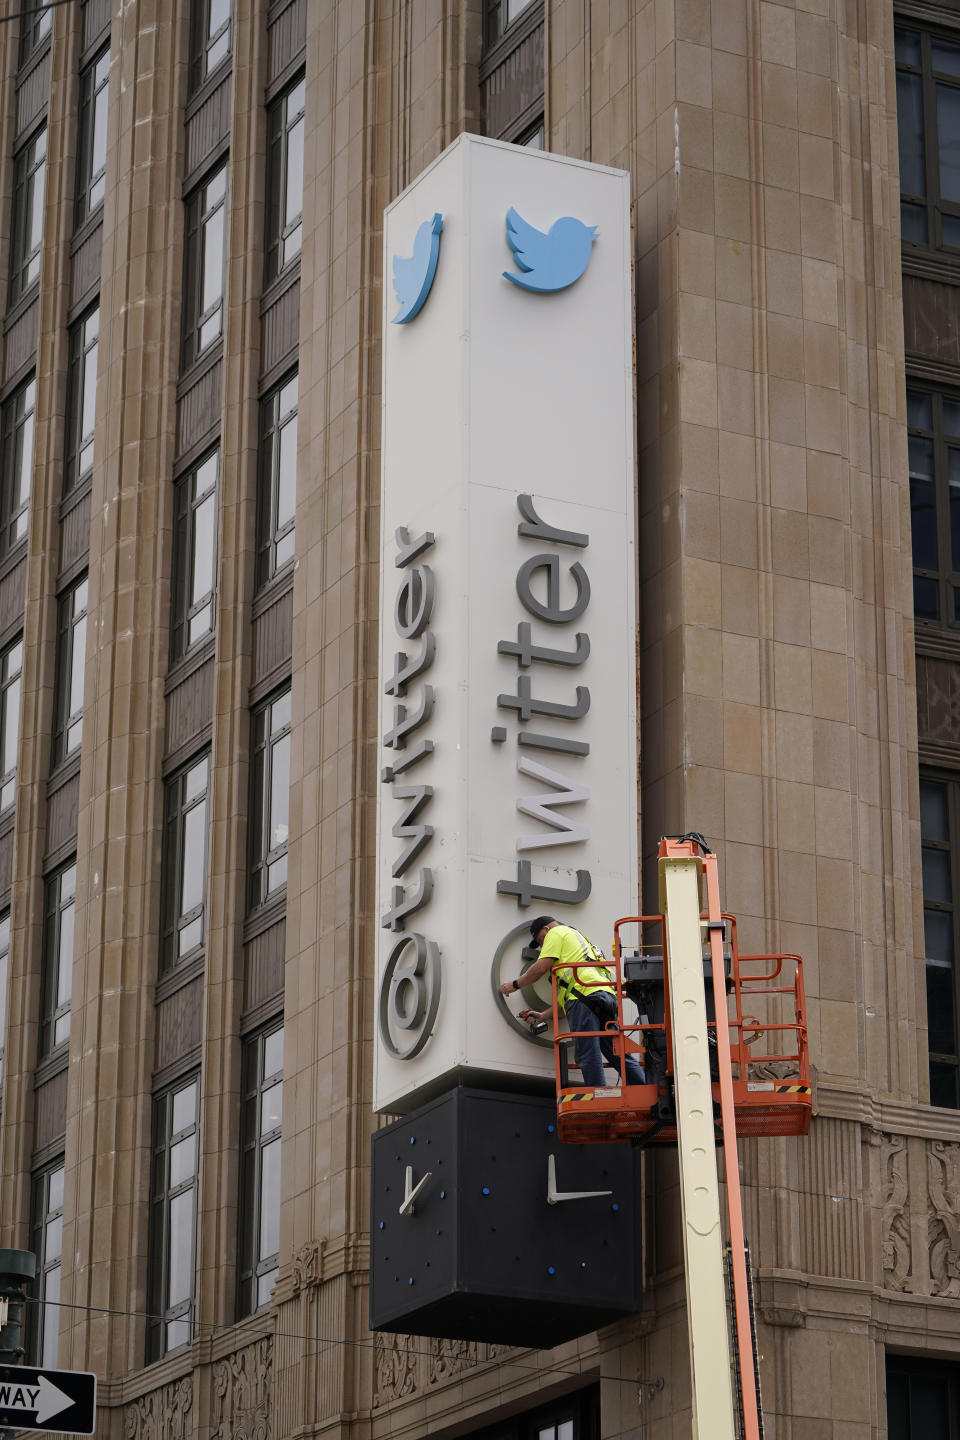 A workman begins removing characters from a sign on the Twitter headquarters building in San Francisco, Monday, July 24, 2023. Elon Musk has unveiled a new "X" logo to replace Twitter's famous blue bird as he follows through with a major rebranding of the social media platform he bought for $44 billion last year. The X started appearing at the top of the desktop version of Twitter on Monday, but the bird was still dominant across the smartphone app. (AP Photo/Godofredo A. Vásquez)